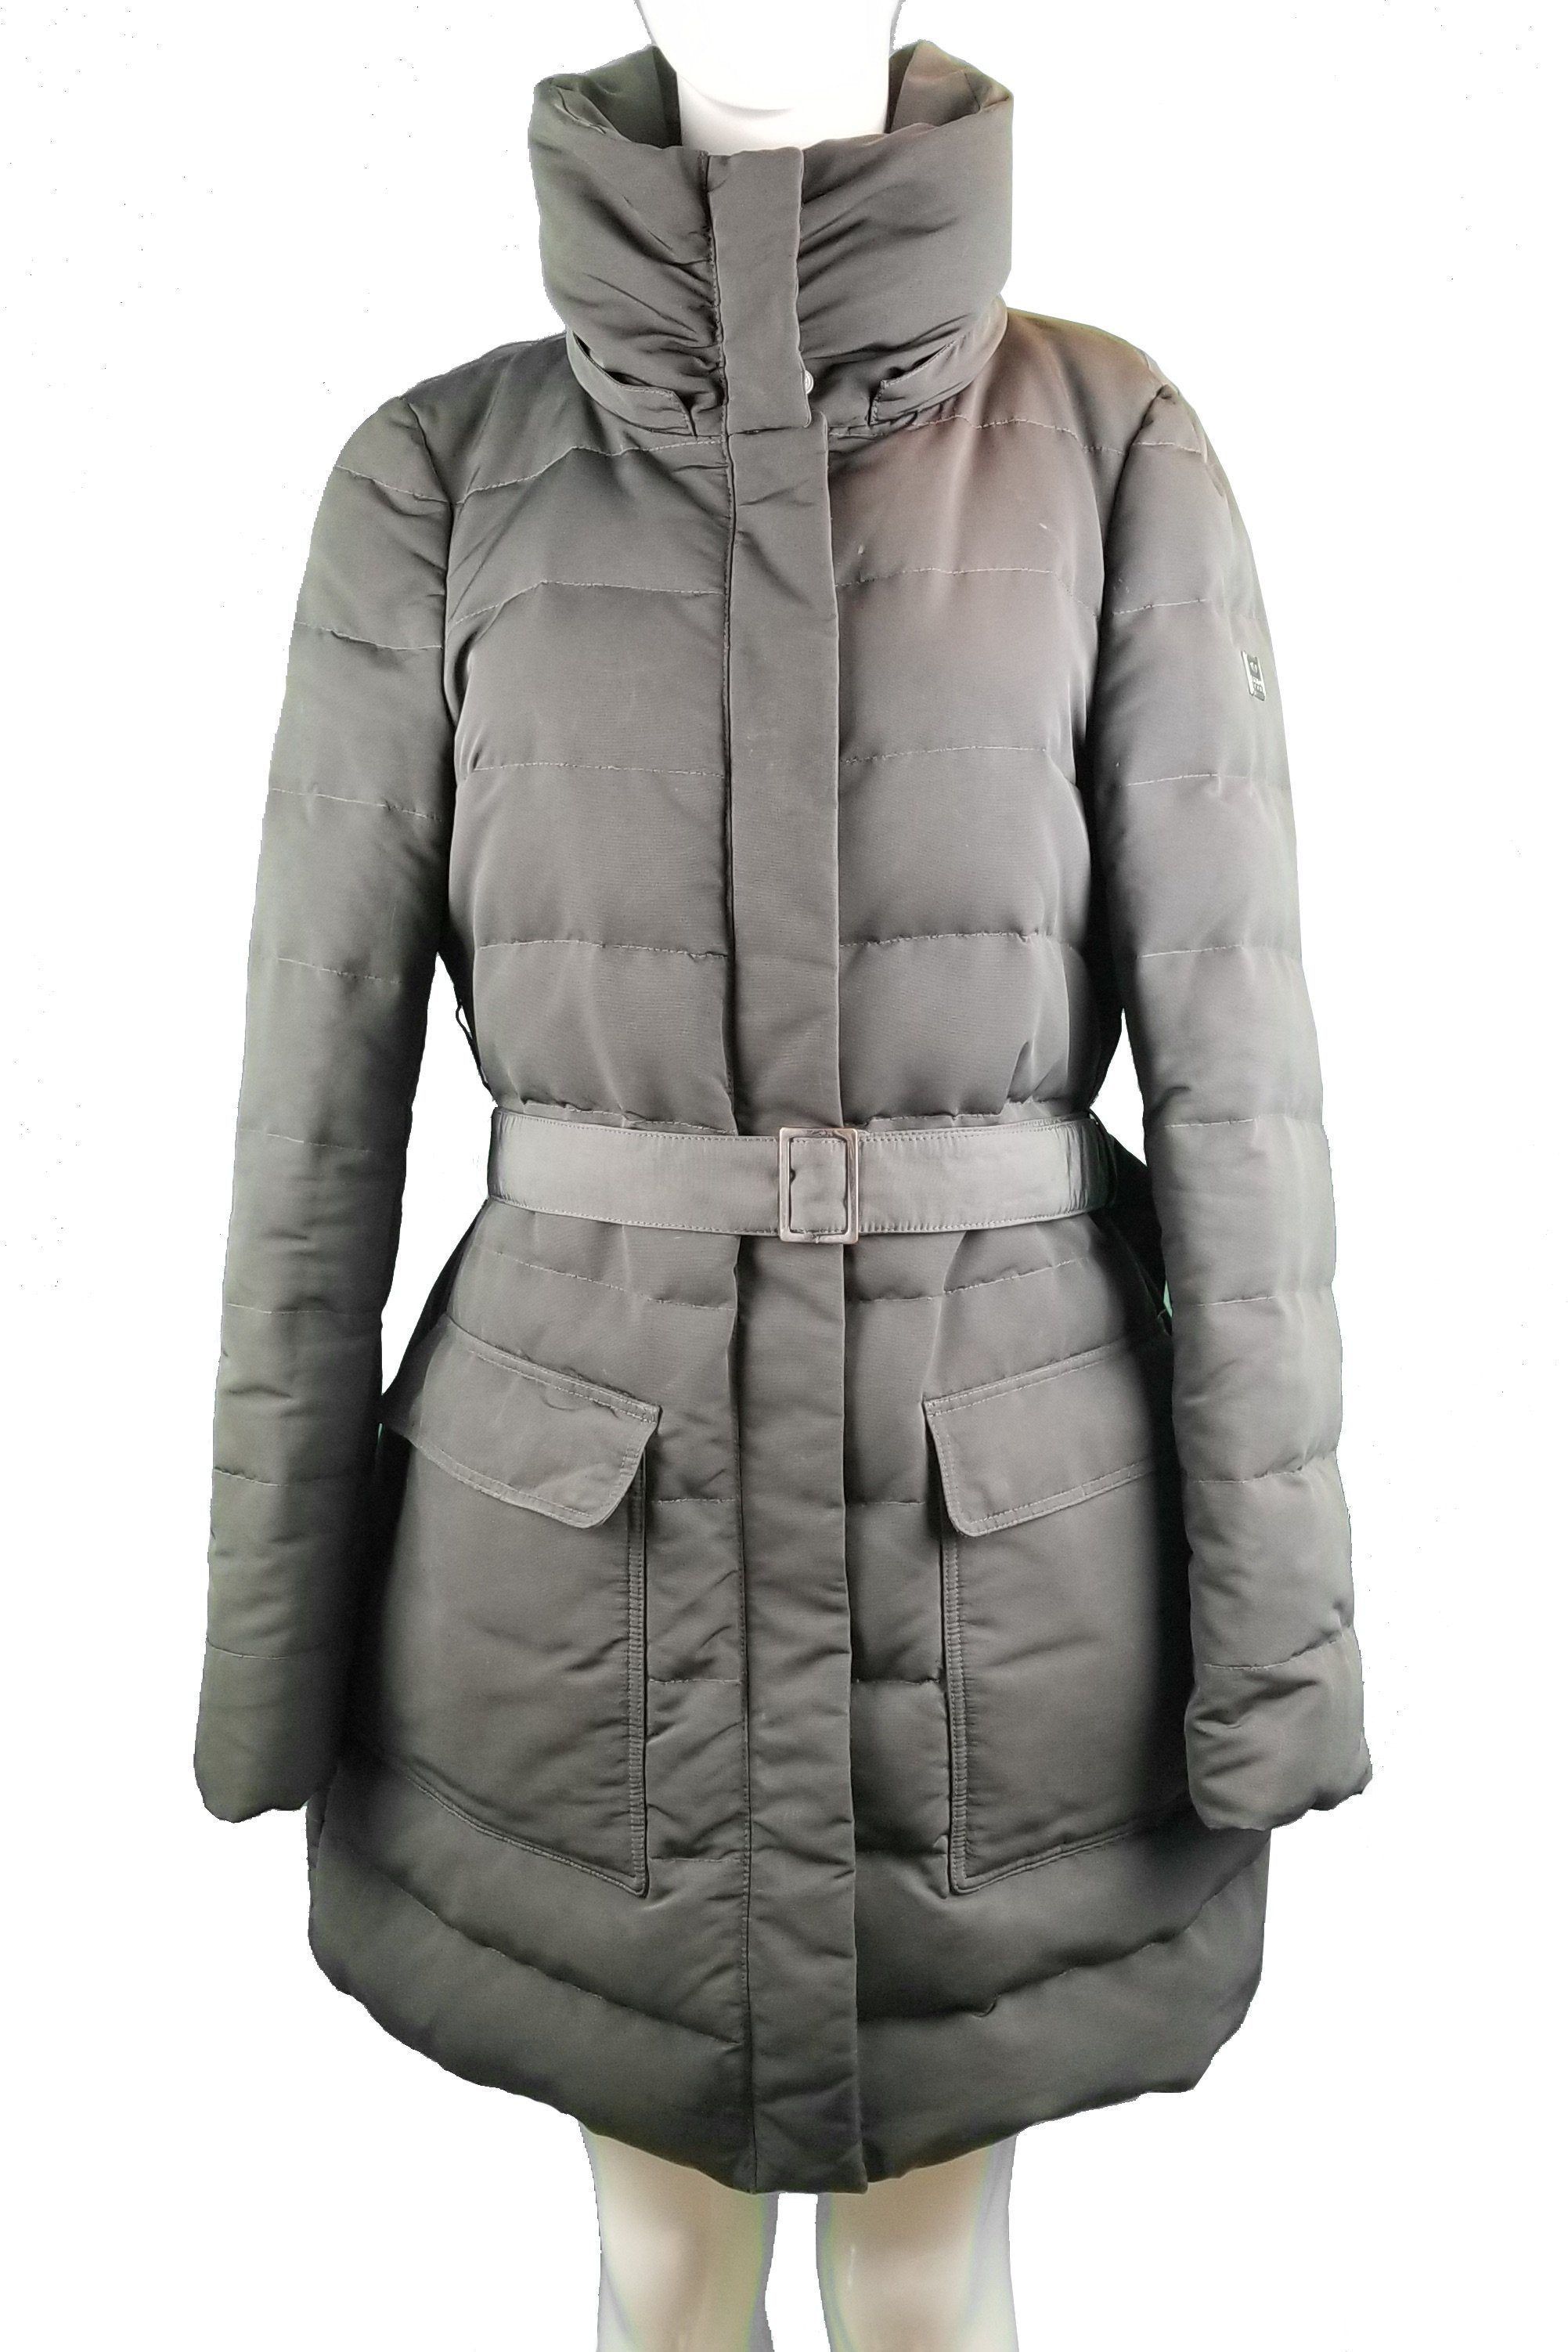 Escada Sport Down Jacket, Dressing warm doesn't have to be dull! This  winter jacket will keep you away from the cold and make you feel so stylish., Grey, Lining 100% Polyester; filling 70% Goose Down, 30% goose Quill, women's Jackets & Coats, women's Grey Jackets & Coats, Escada Sport women's Jackets & Coats, women's down jacket, women's warm winter jacket, down jacket, long winter down overcoat